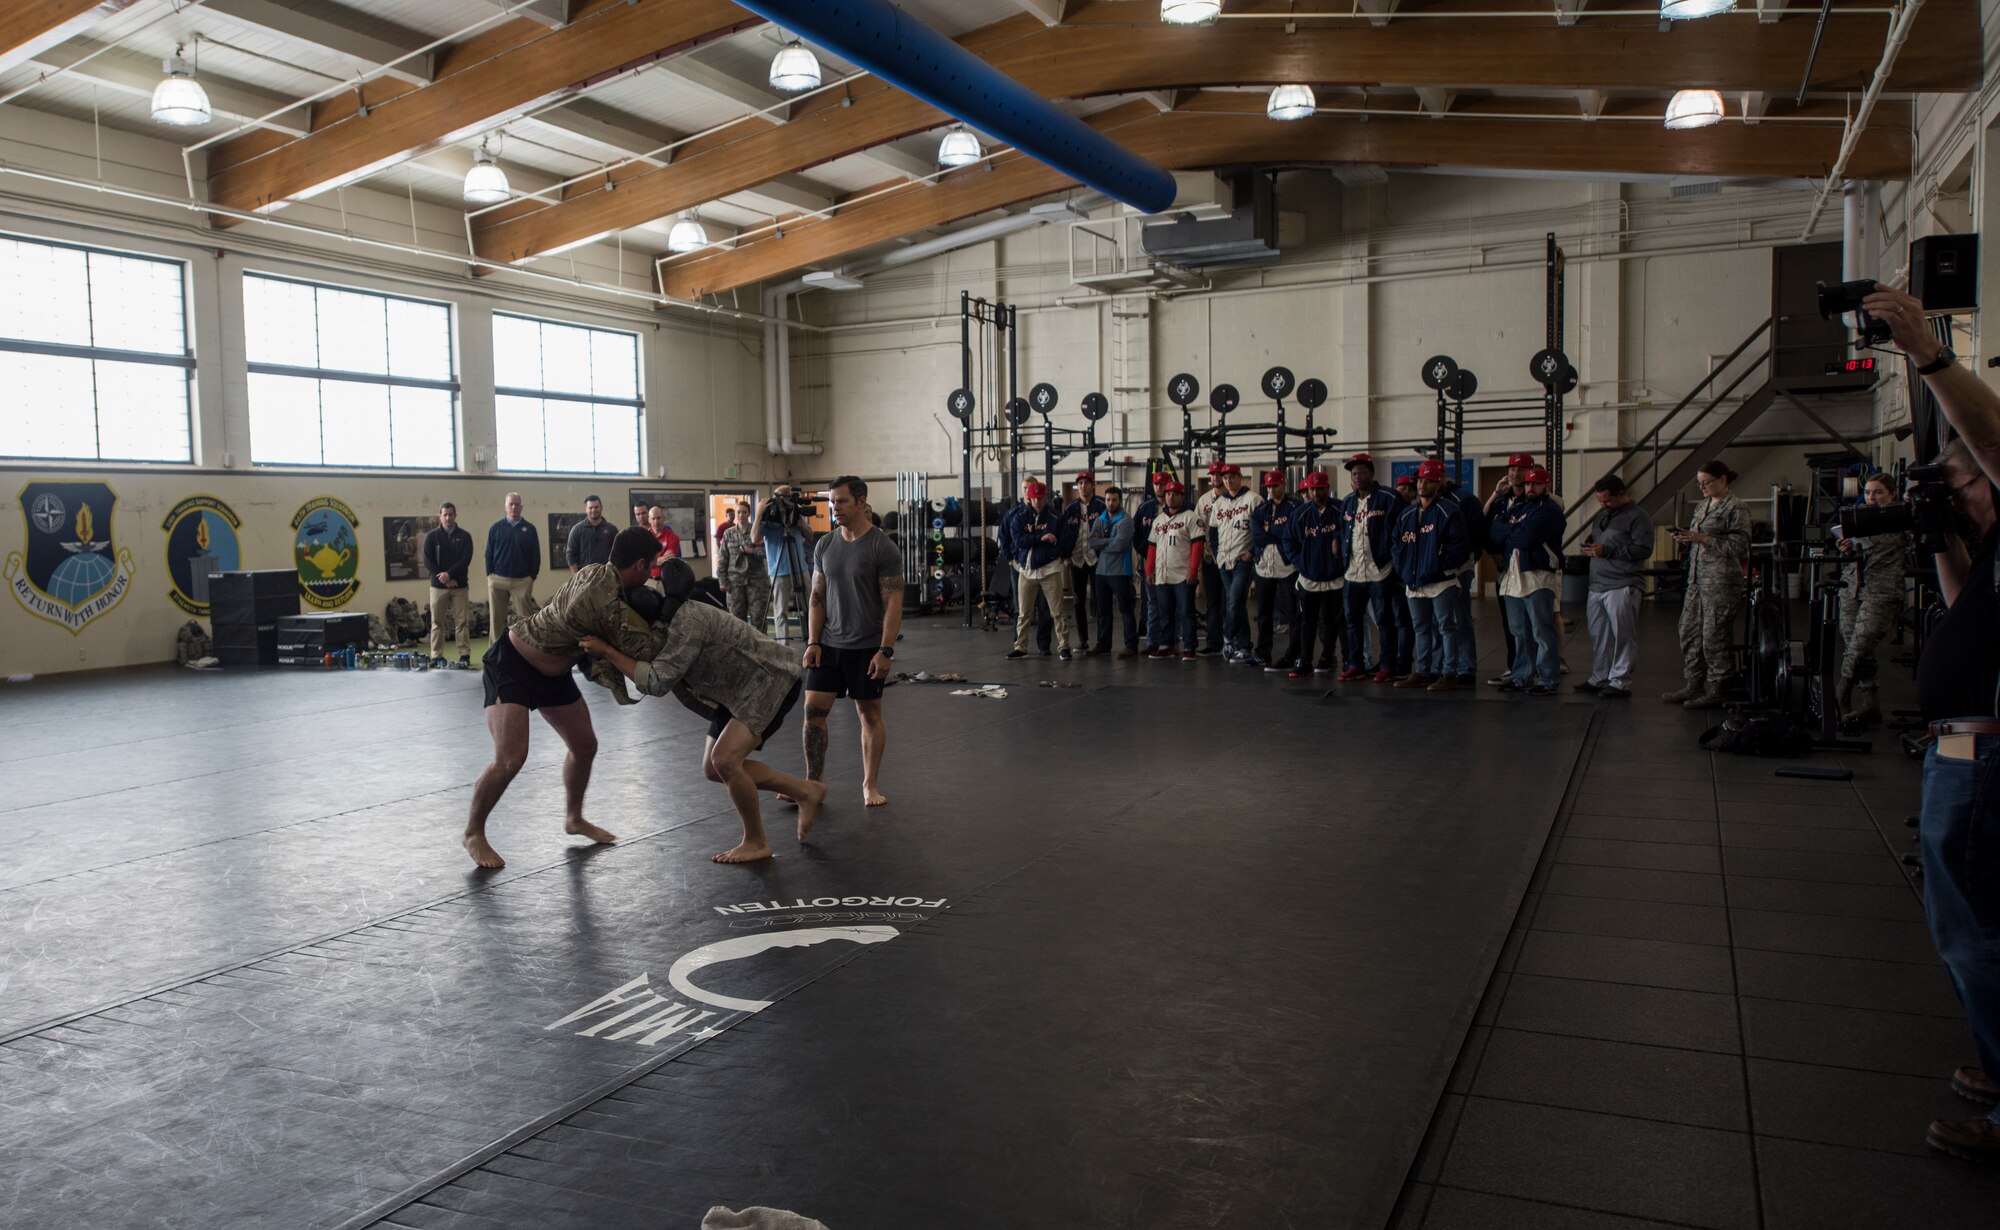 The Spokane Indians Baseball team observe a Survival, Evasion, Resistance and Escape hand-to-hand combat demonstration at Fairchild Air Force Base, Wash. June 12, 2018. The Air Force combatives program develops an Airman’s individual strength, confidence, resilience and lethality, while simultaneously imparting a strong warrior ethos. (U.S. Air Force photo/Senior Airman Sean Campbell)